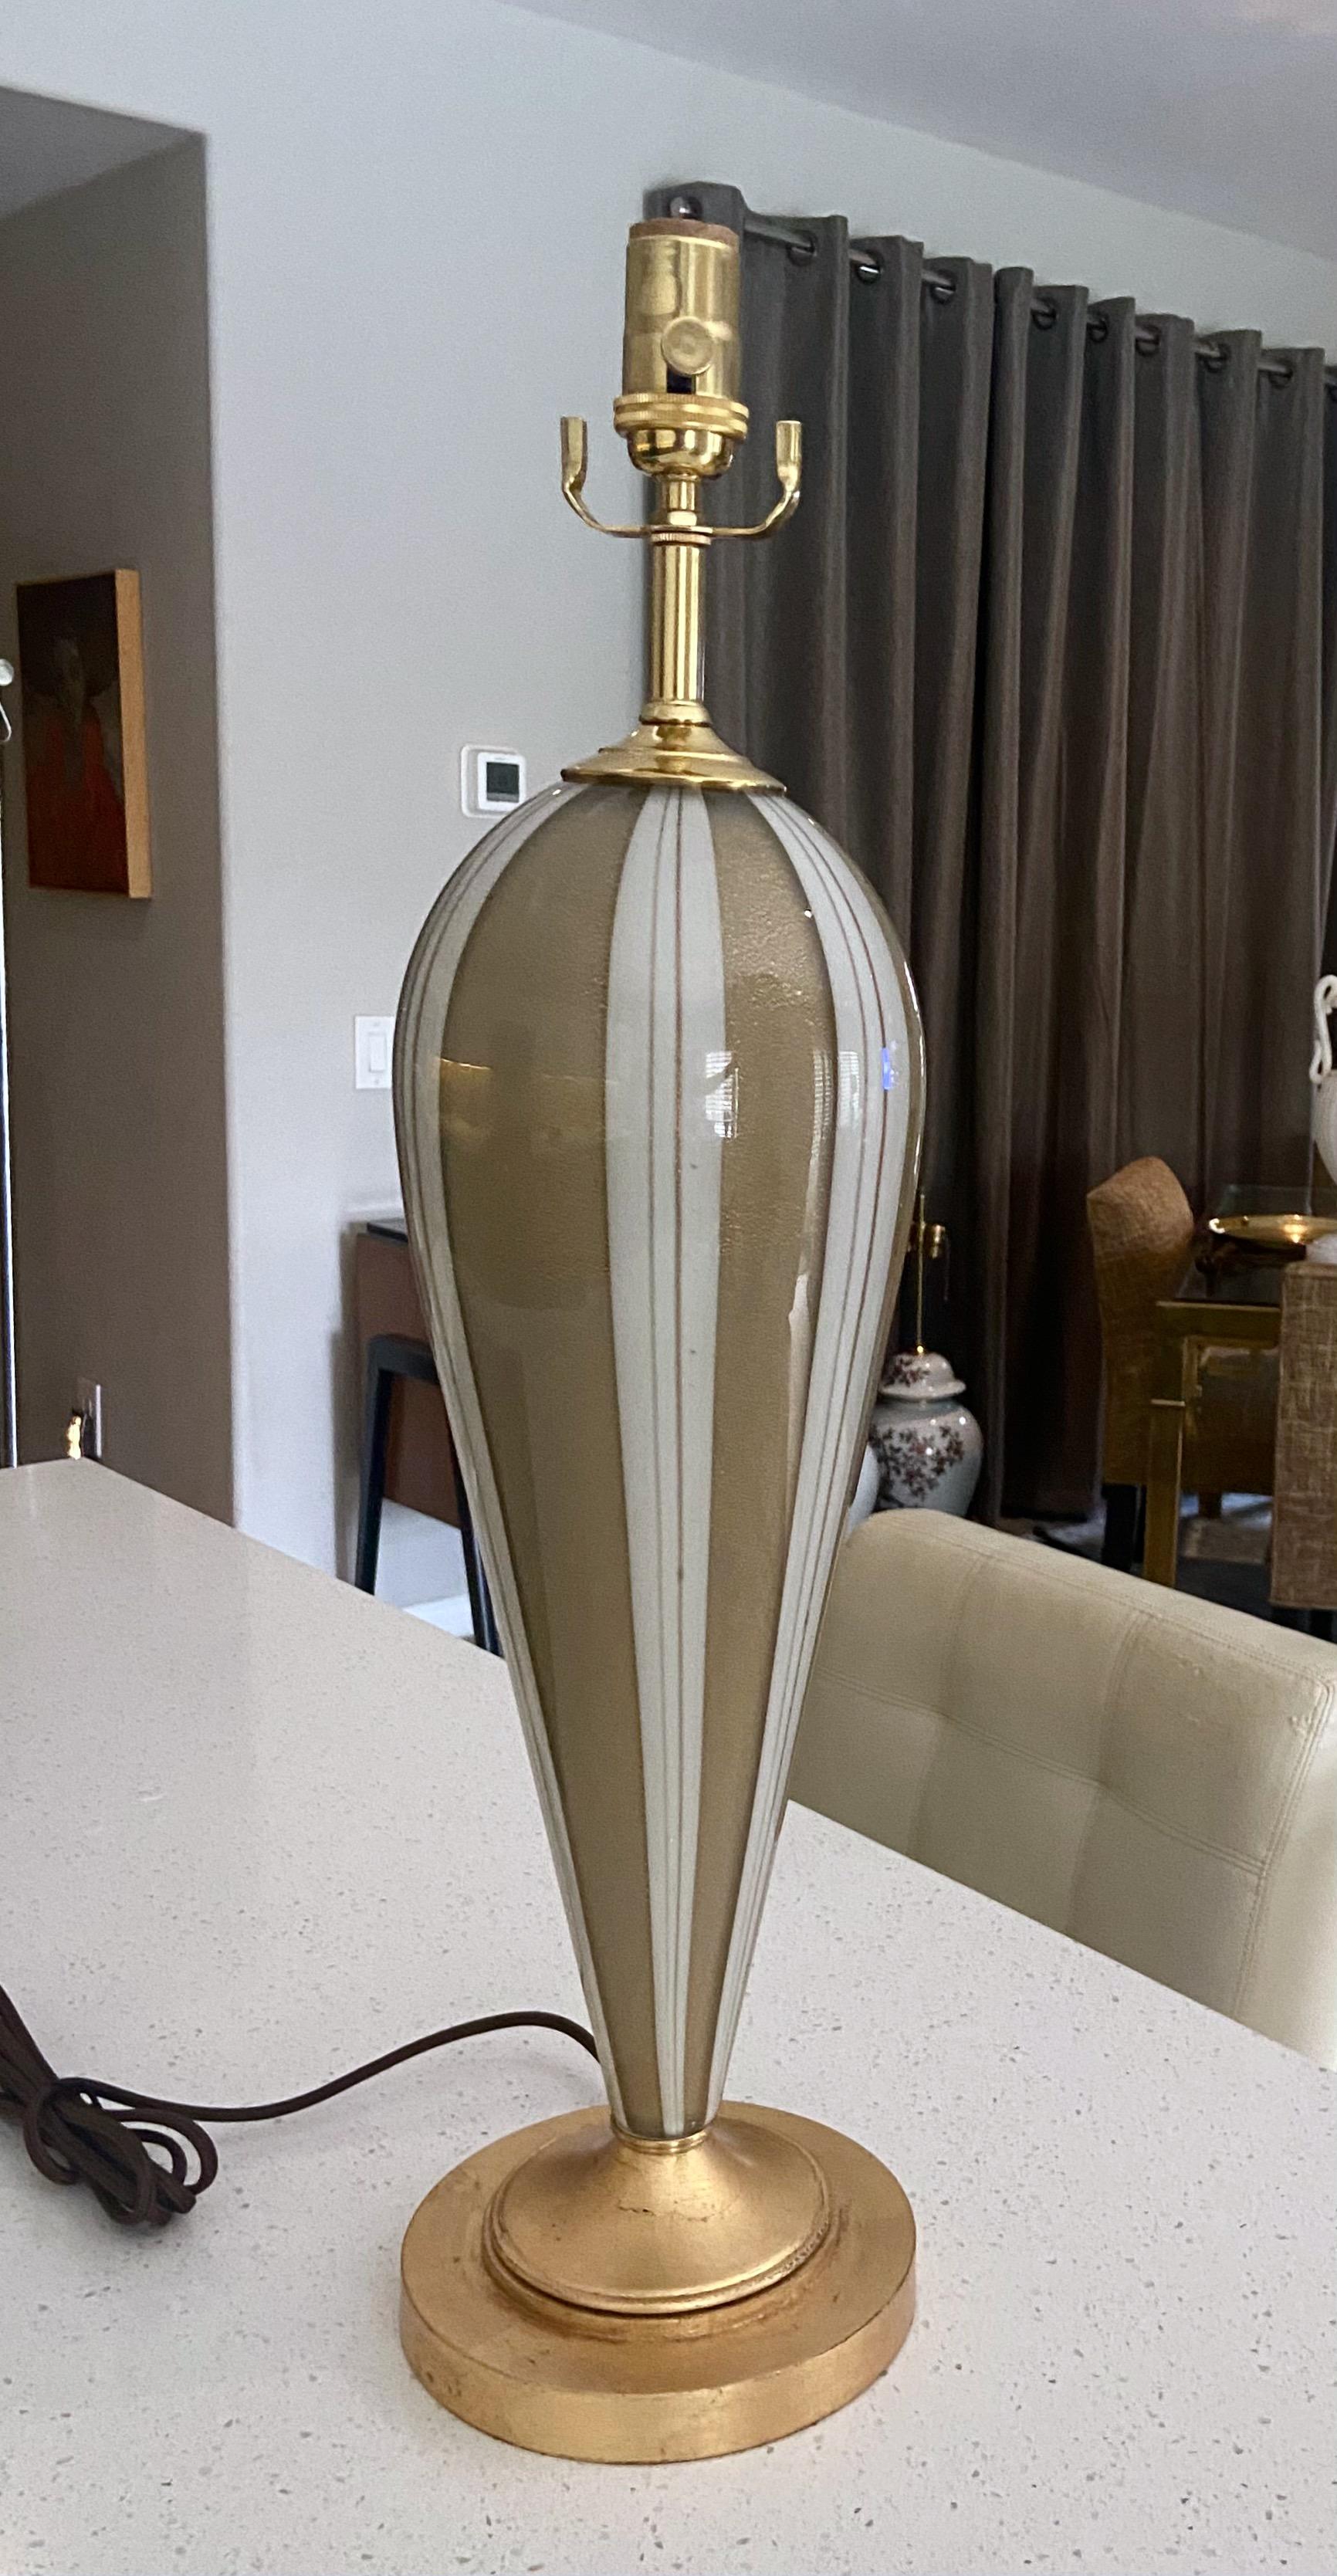 Murano hand blown glass tear drop shape table lamp with white & gold aventurine inclusions on giltwood base base. The glass body is solid and heavy (not hollow and lightweight). Newly wired with new 3-way brass socket and rayon covered cord. Glass